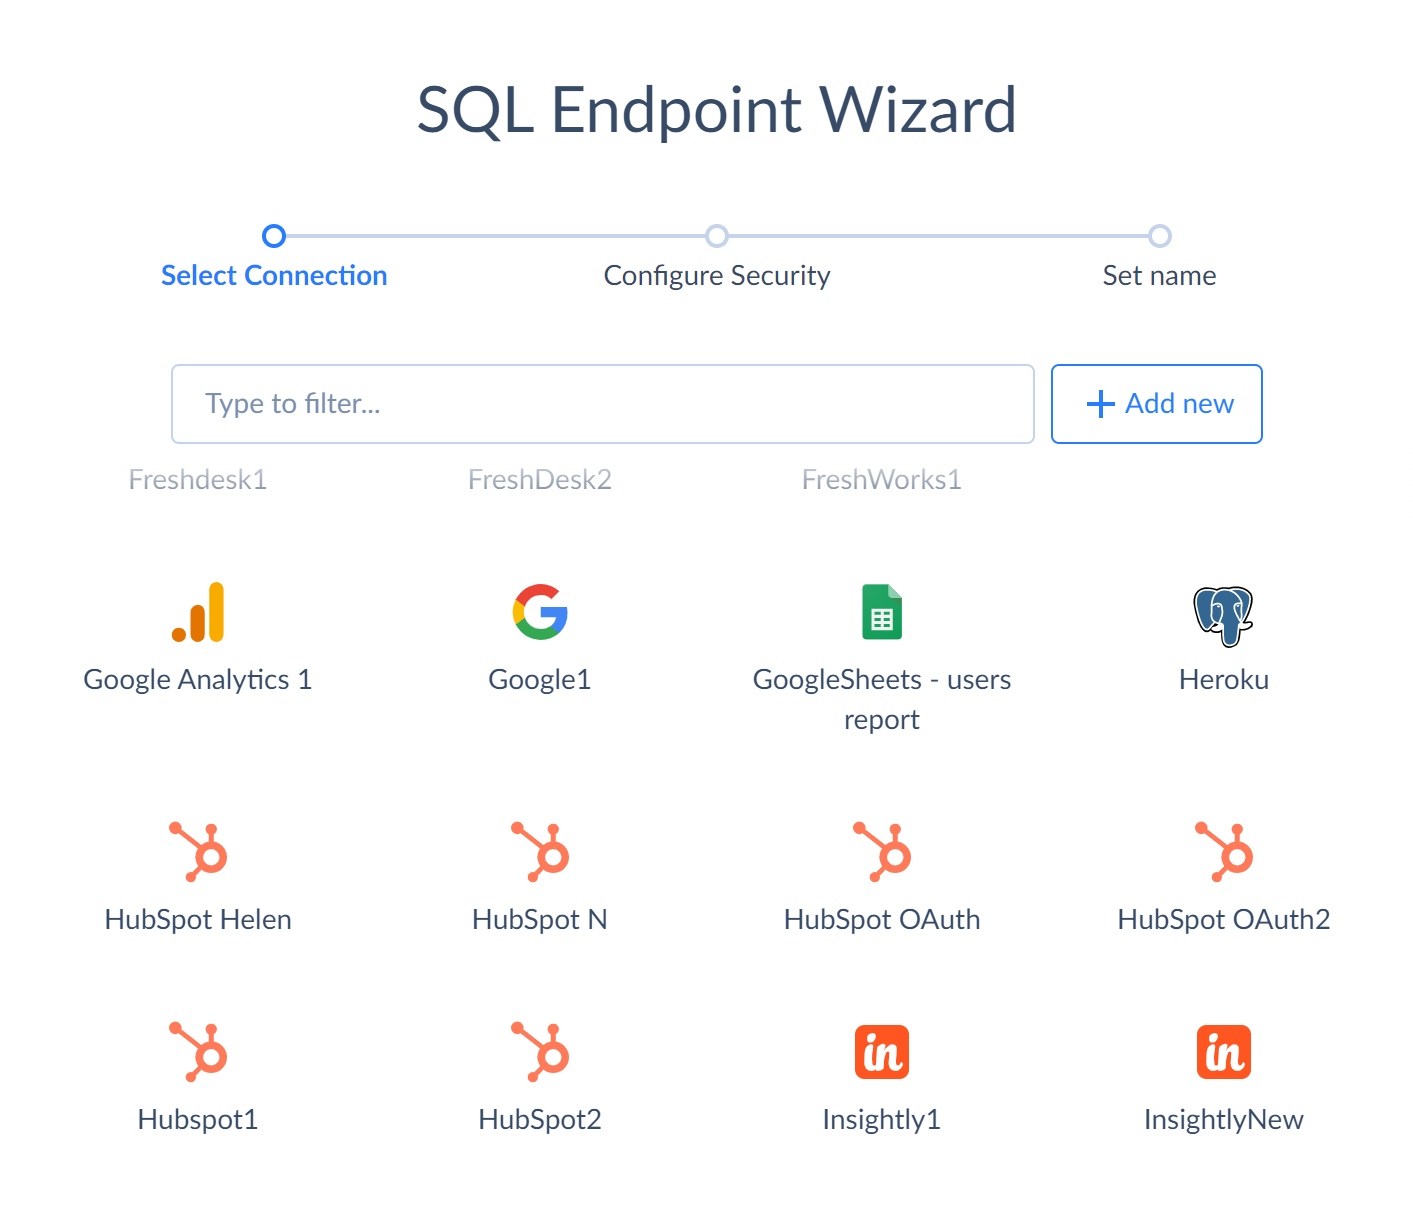 Creating connection from an endpoint wizard